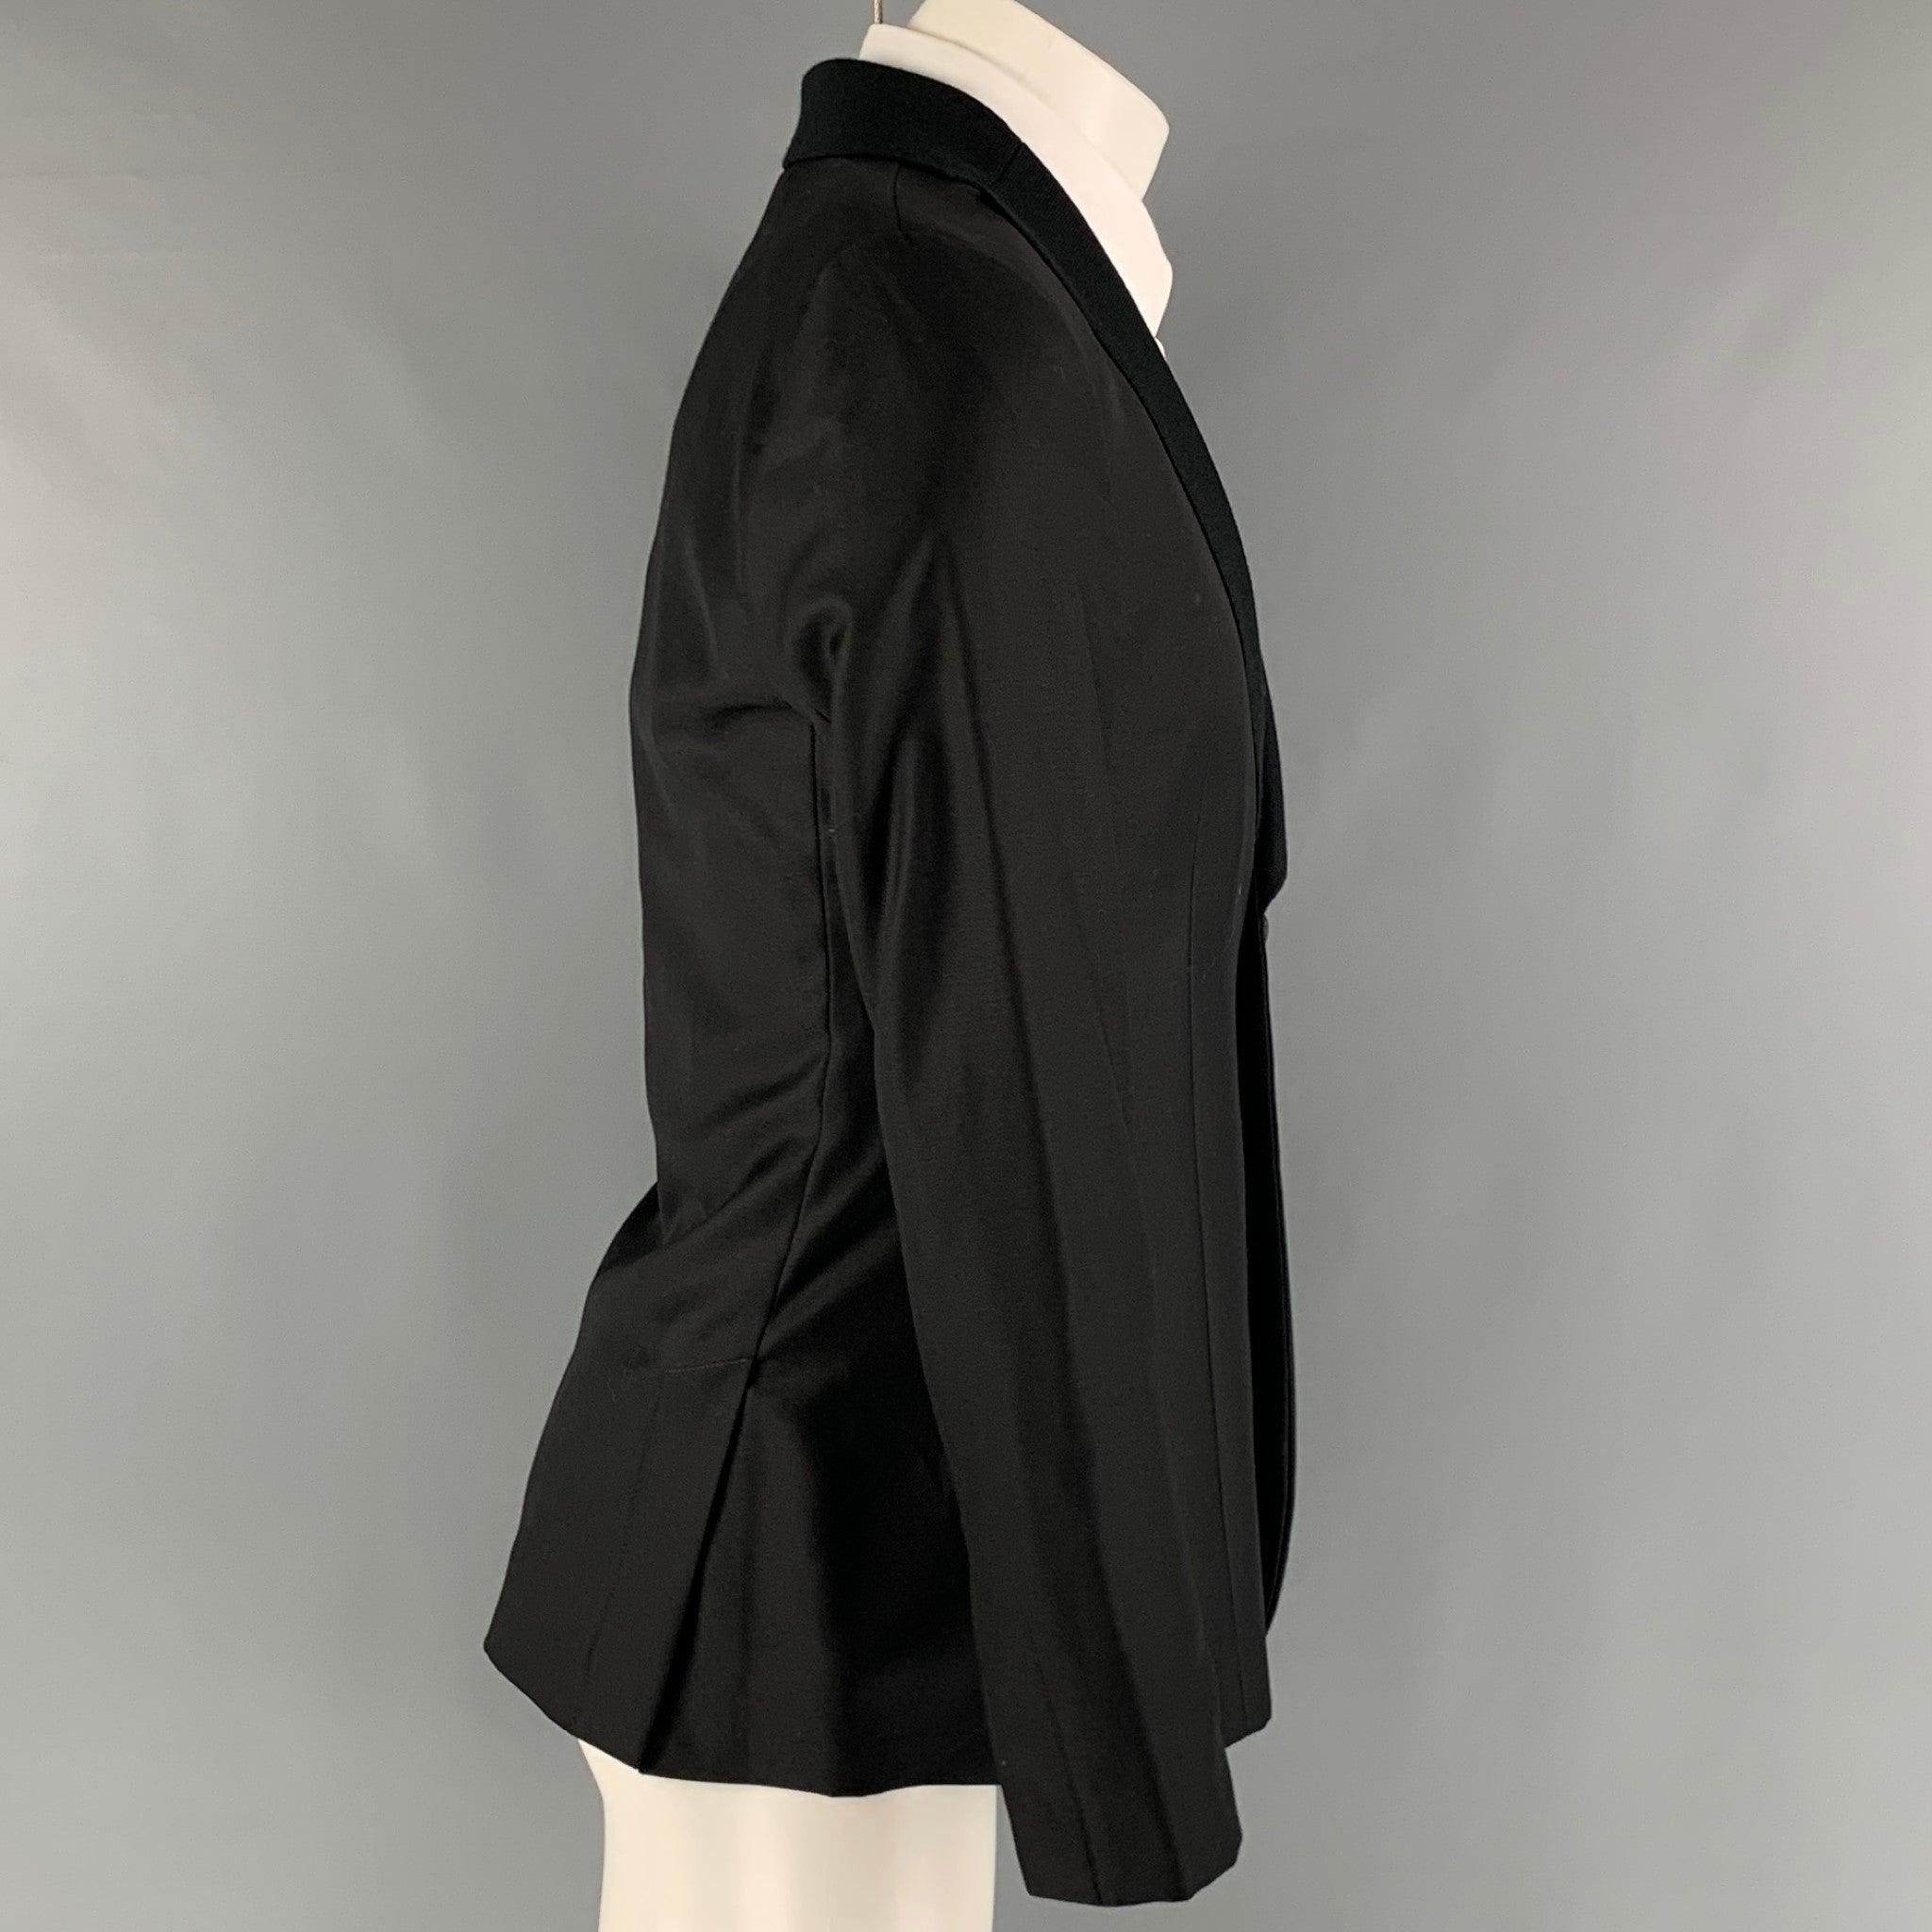 EMPORIO ARMANI 'MILANO' sport coat comes in a black wool and silk woven material with a full liner featuring a notch lapel, side pockets, and a single button closure. Made in Italy. Excellent Pre-Owned Condition. 

Marked:   48 

Measurements: 
